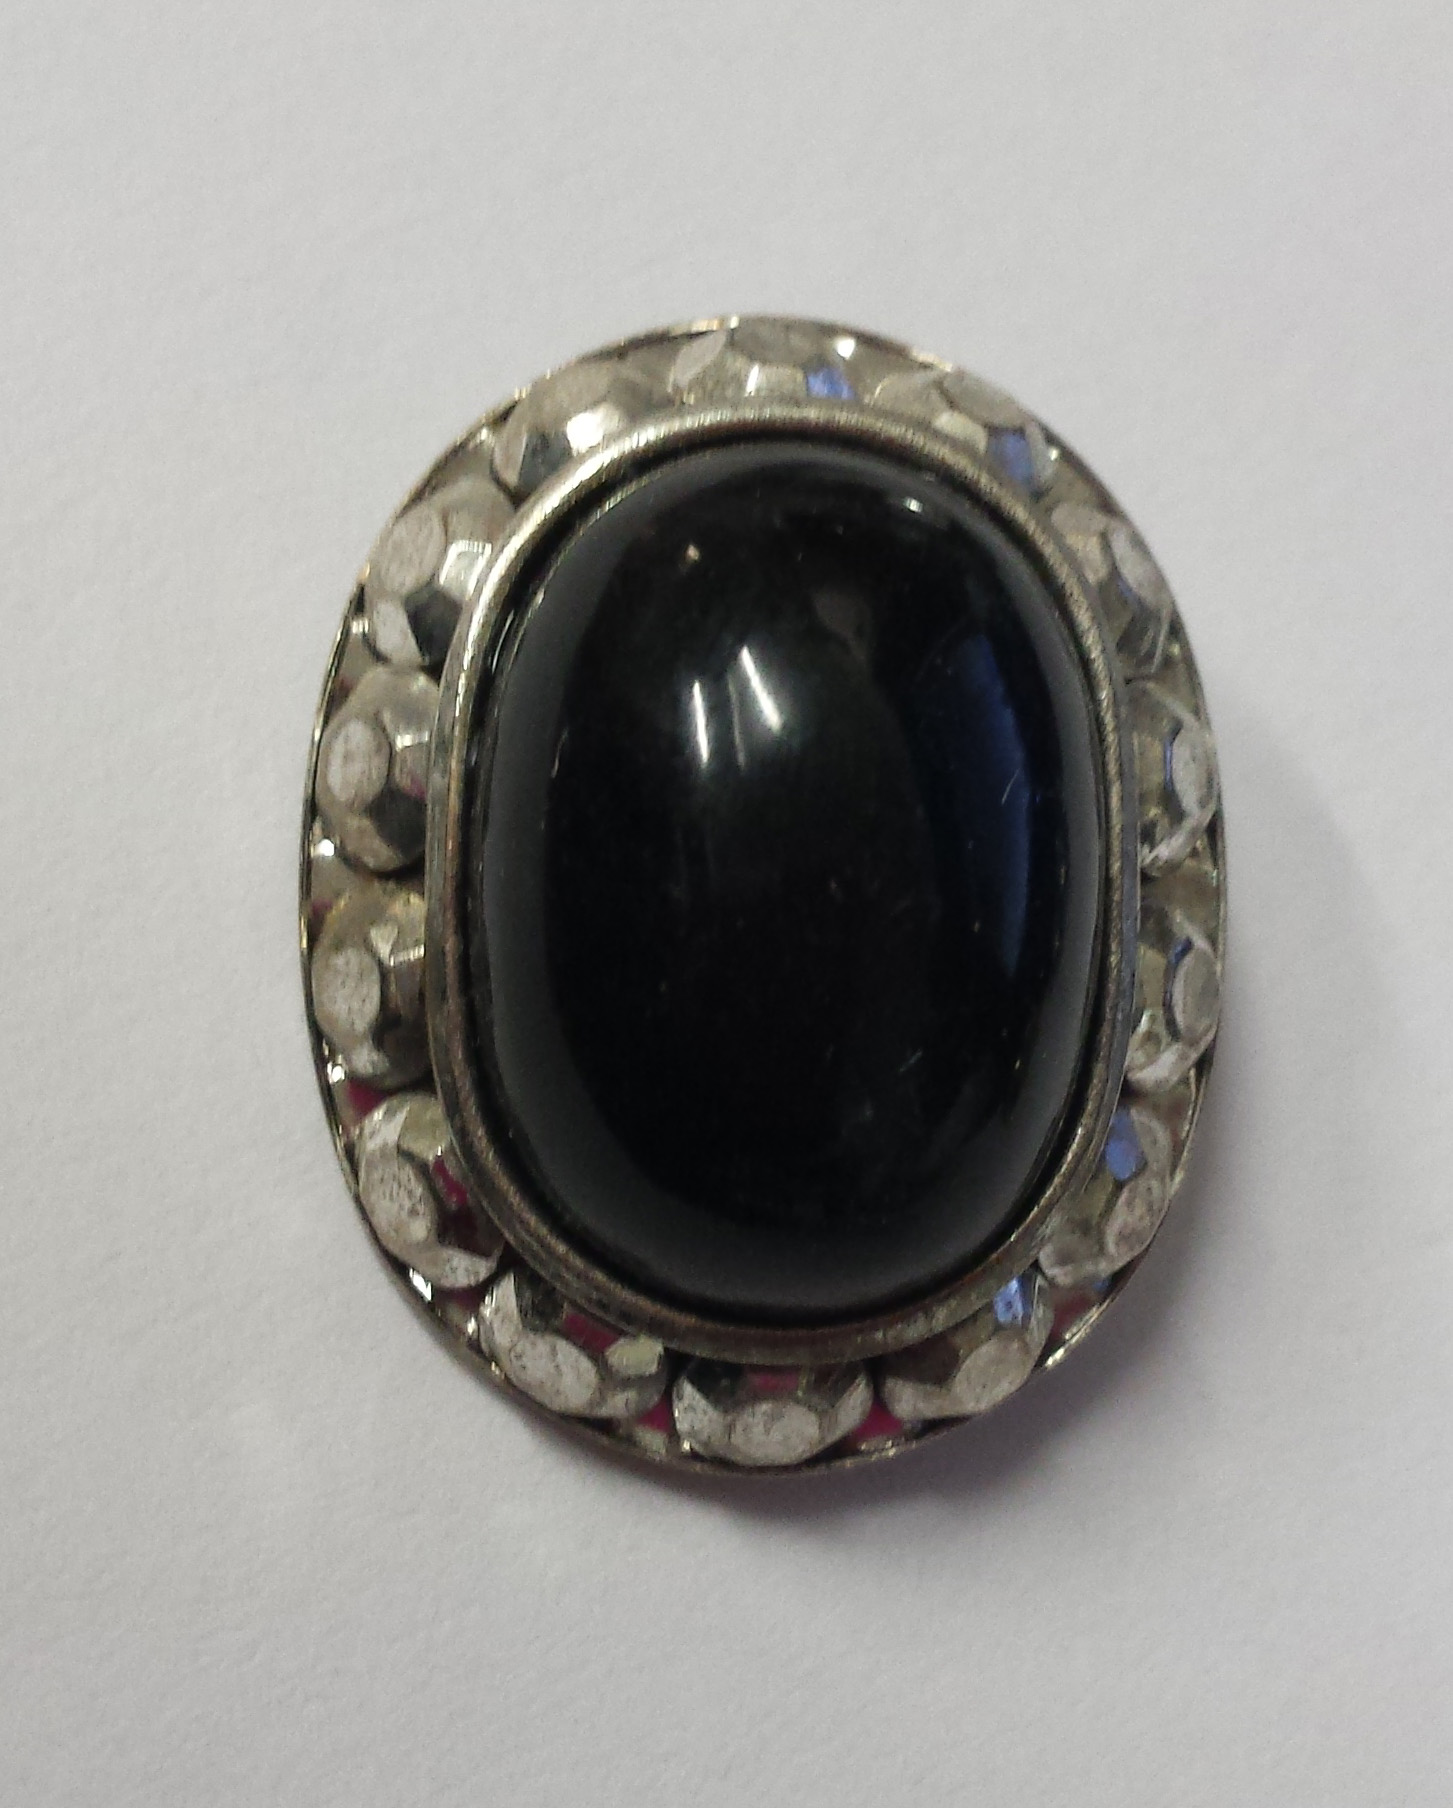 Black with Silver Surround Oval Dazzle Button - 1 inch by 3/4 inch #56004